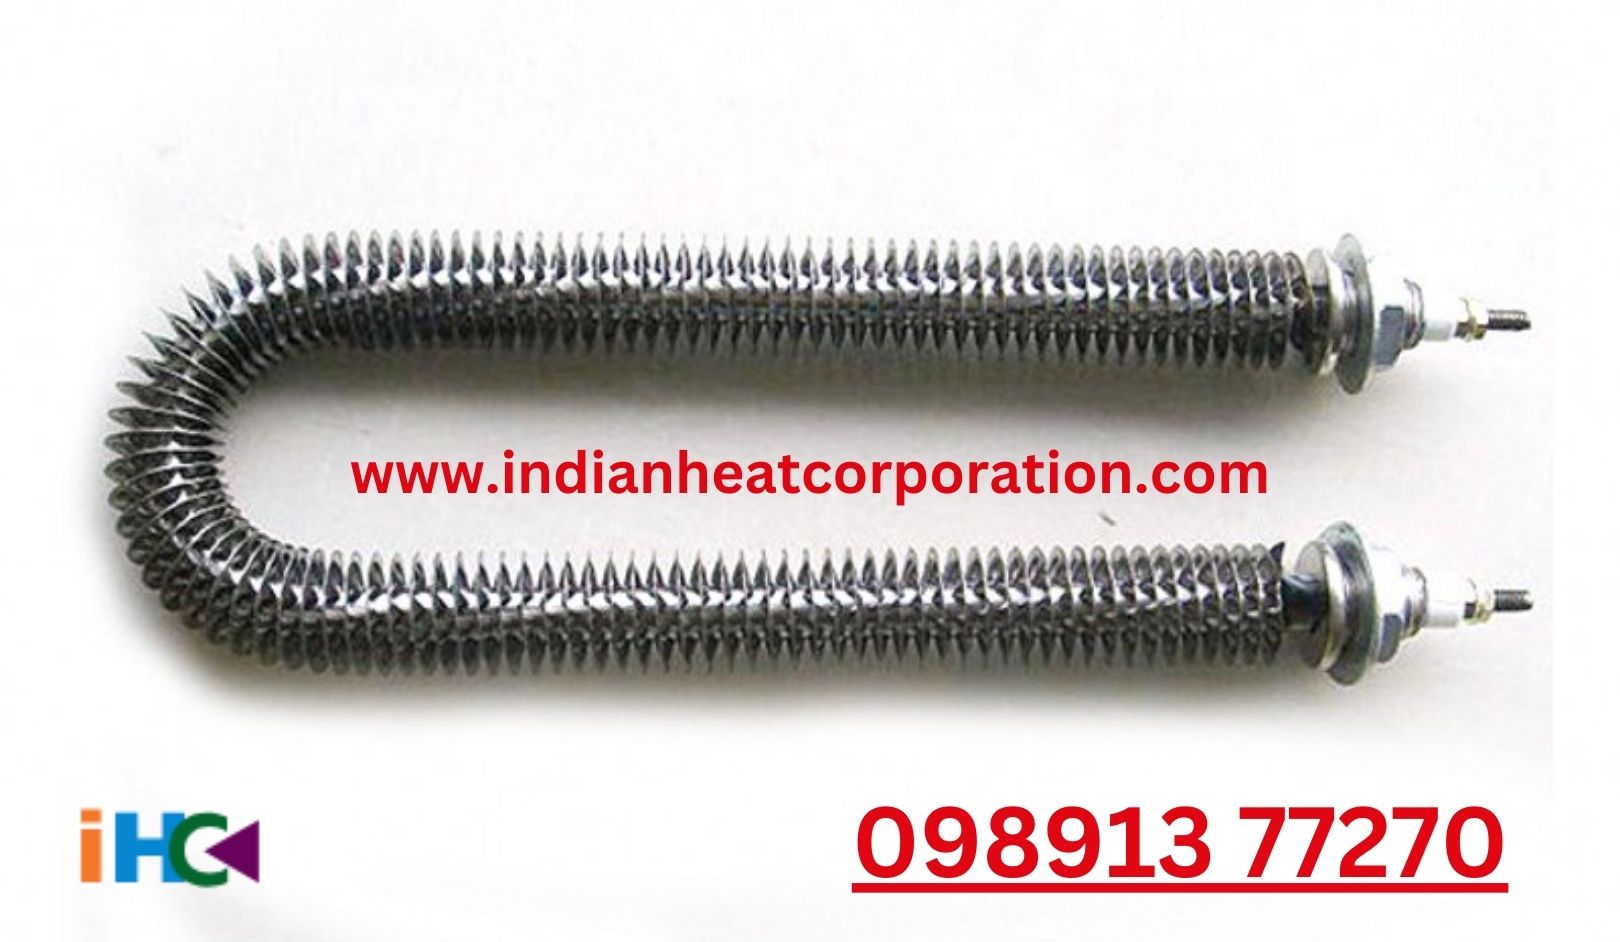 Finned Air Element Manufacturers and Suppliers in Delhi